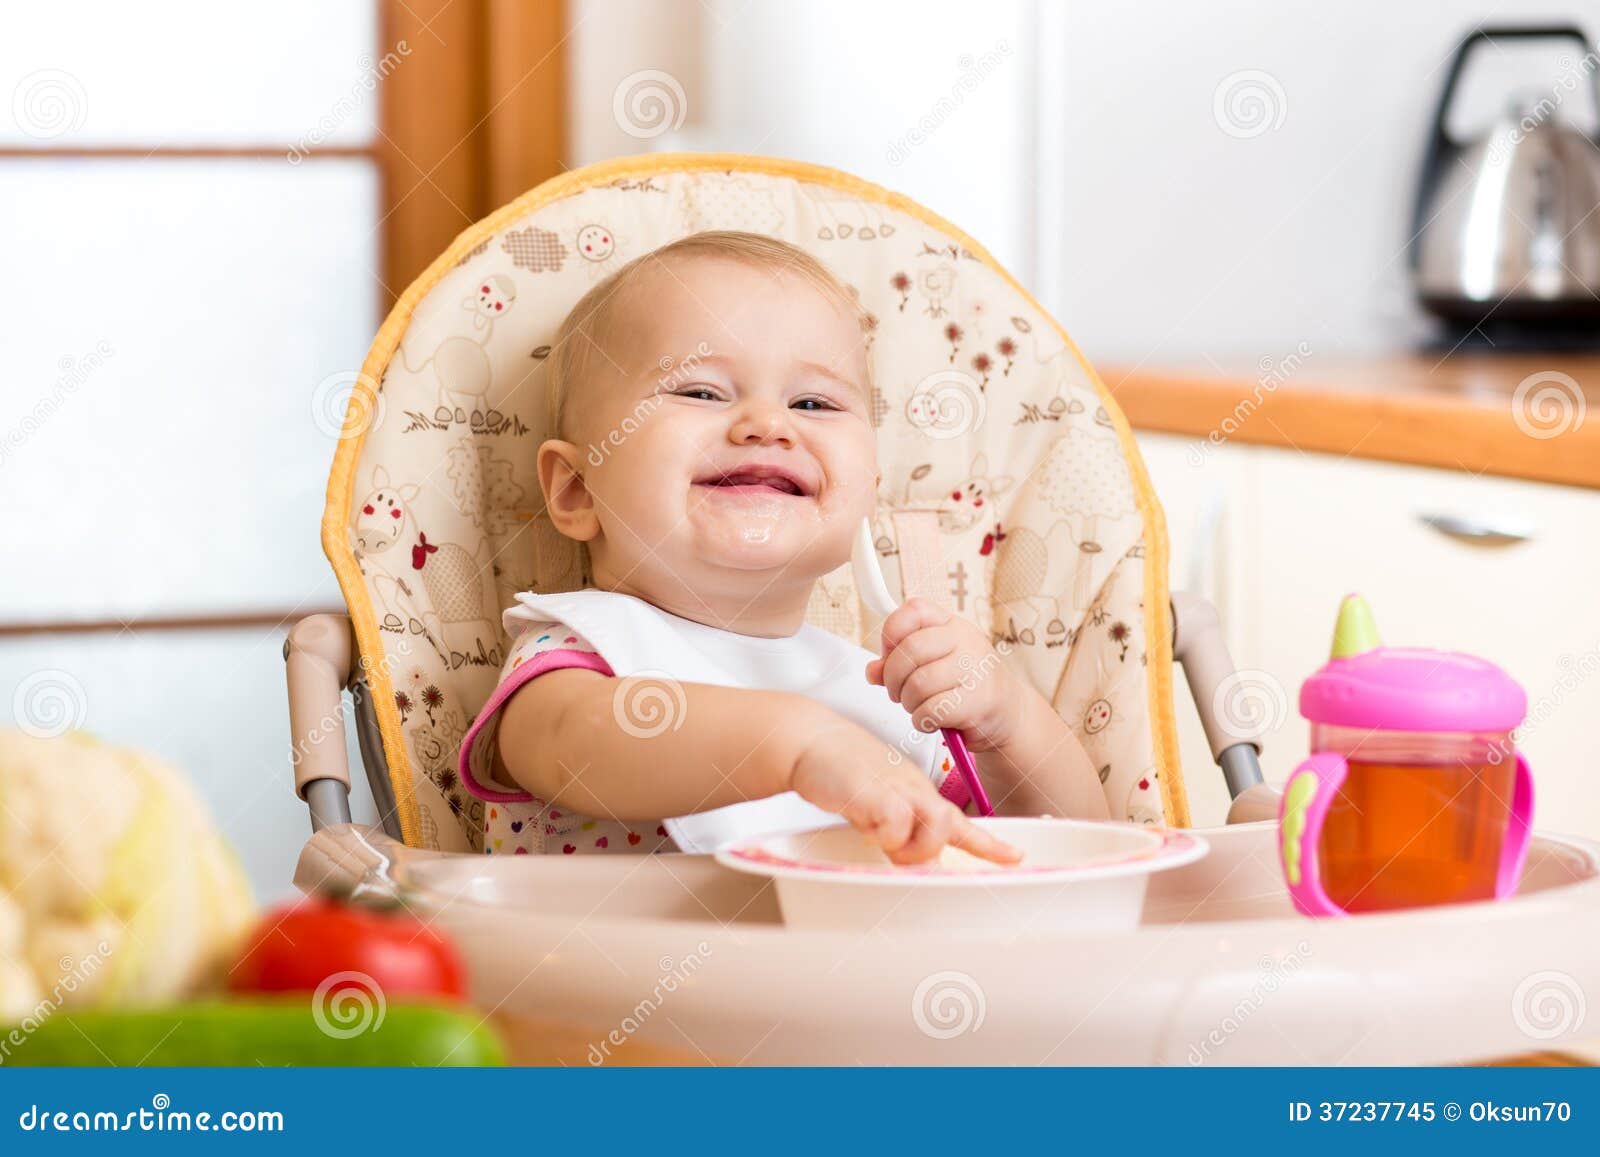 Baby Eating Healthy Food On Kitchen Stock Image - Image of cute